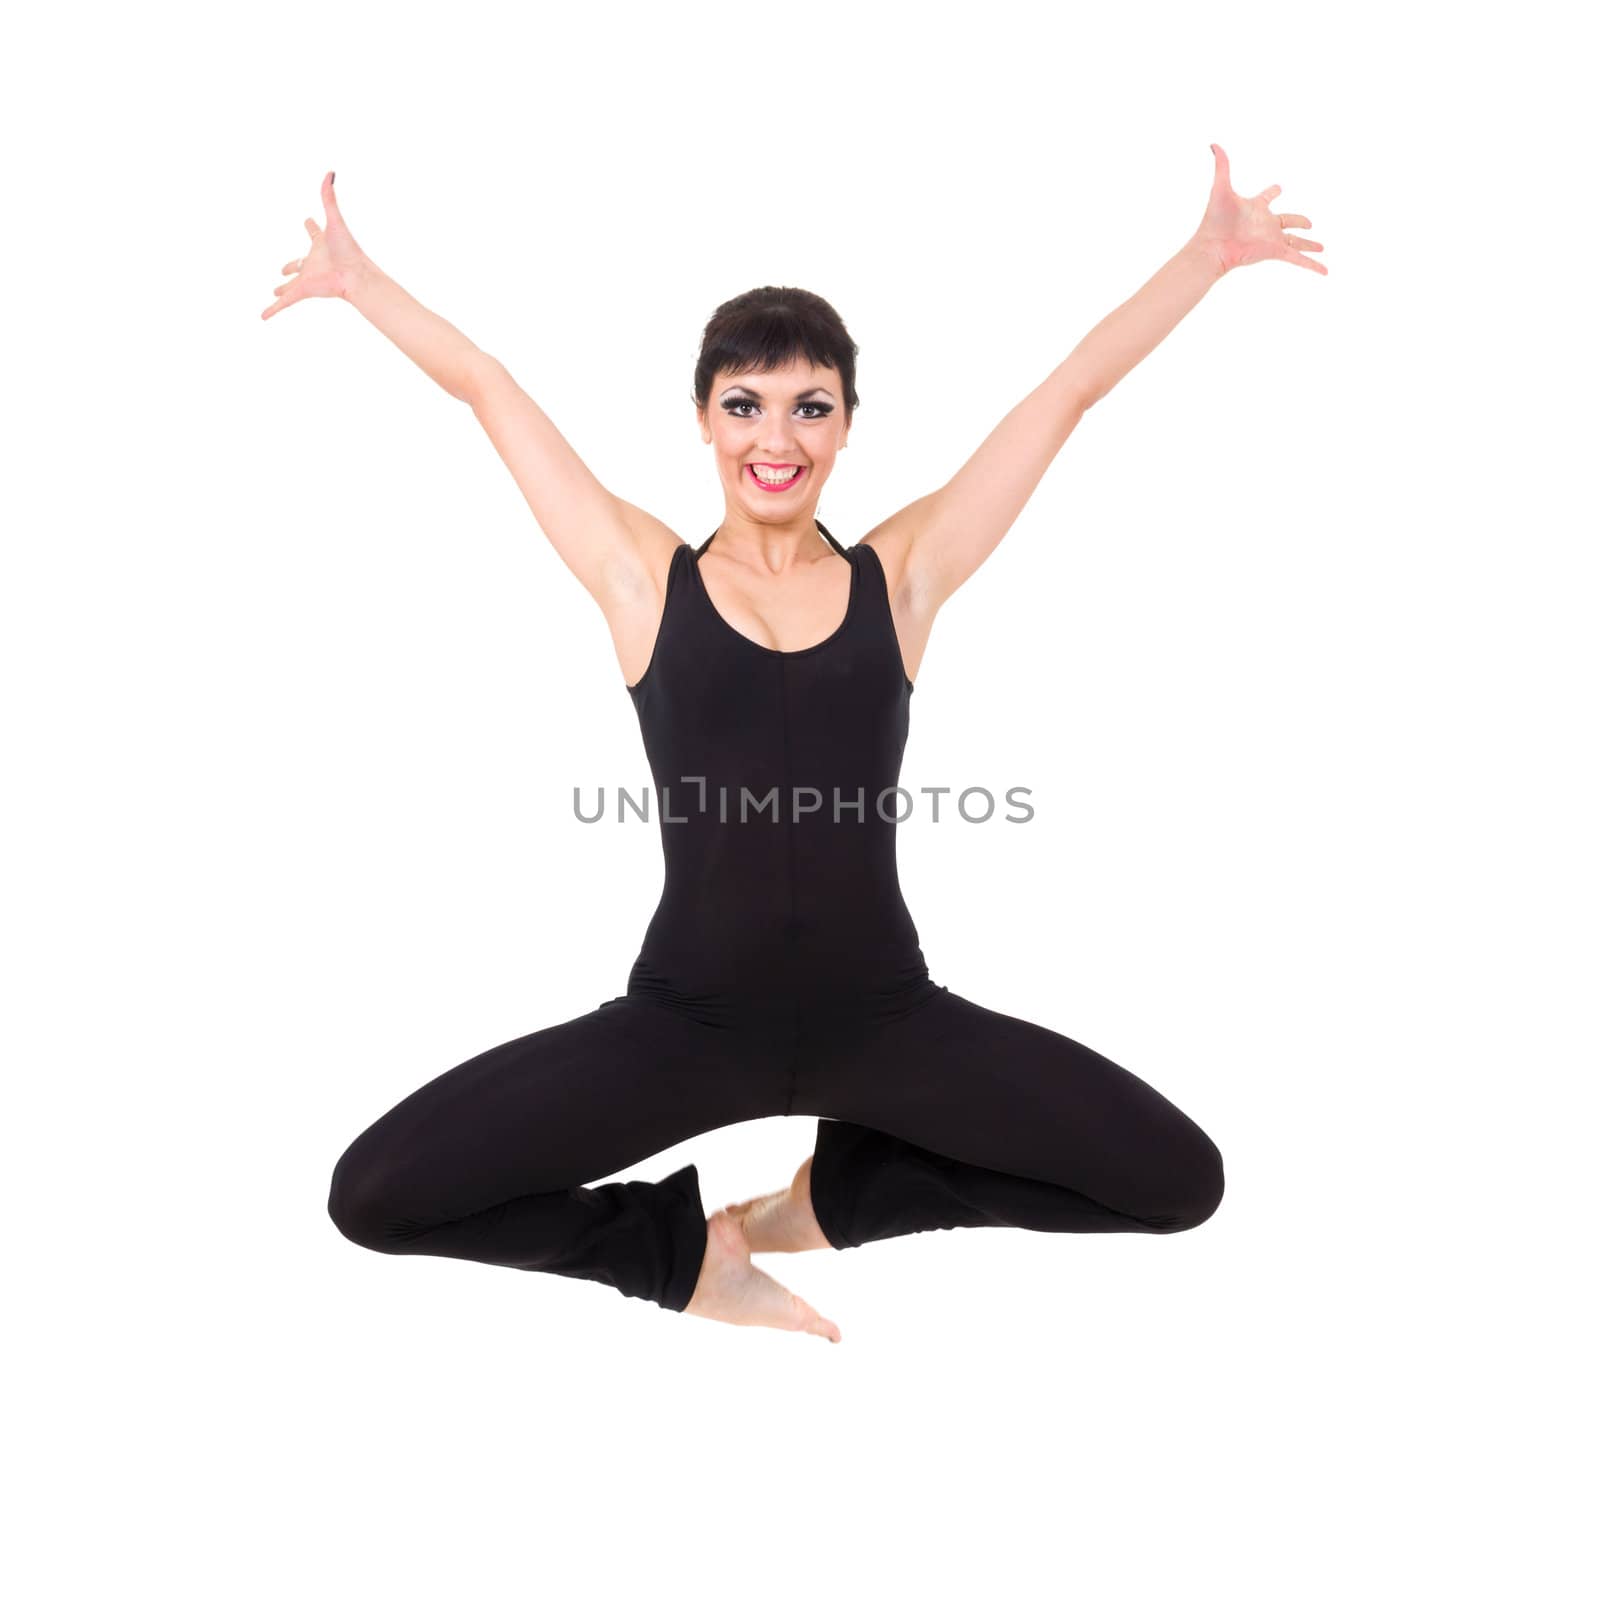 Attractive young dancer jumping against isolated white background